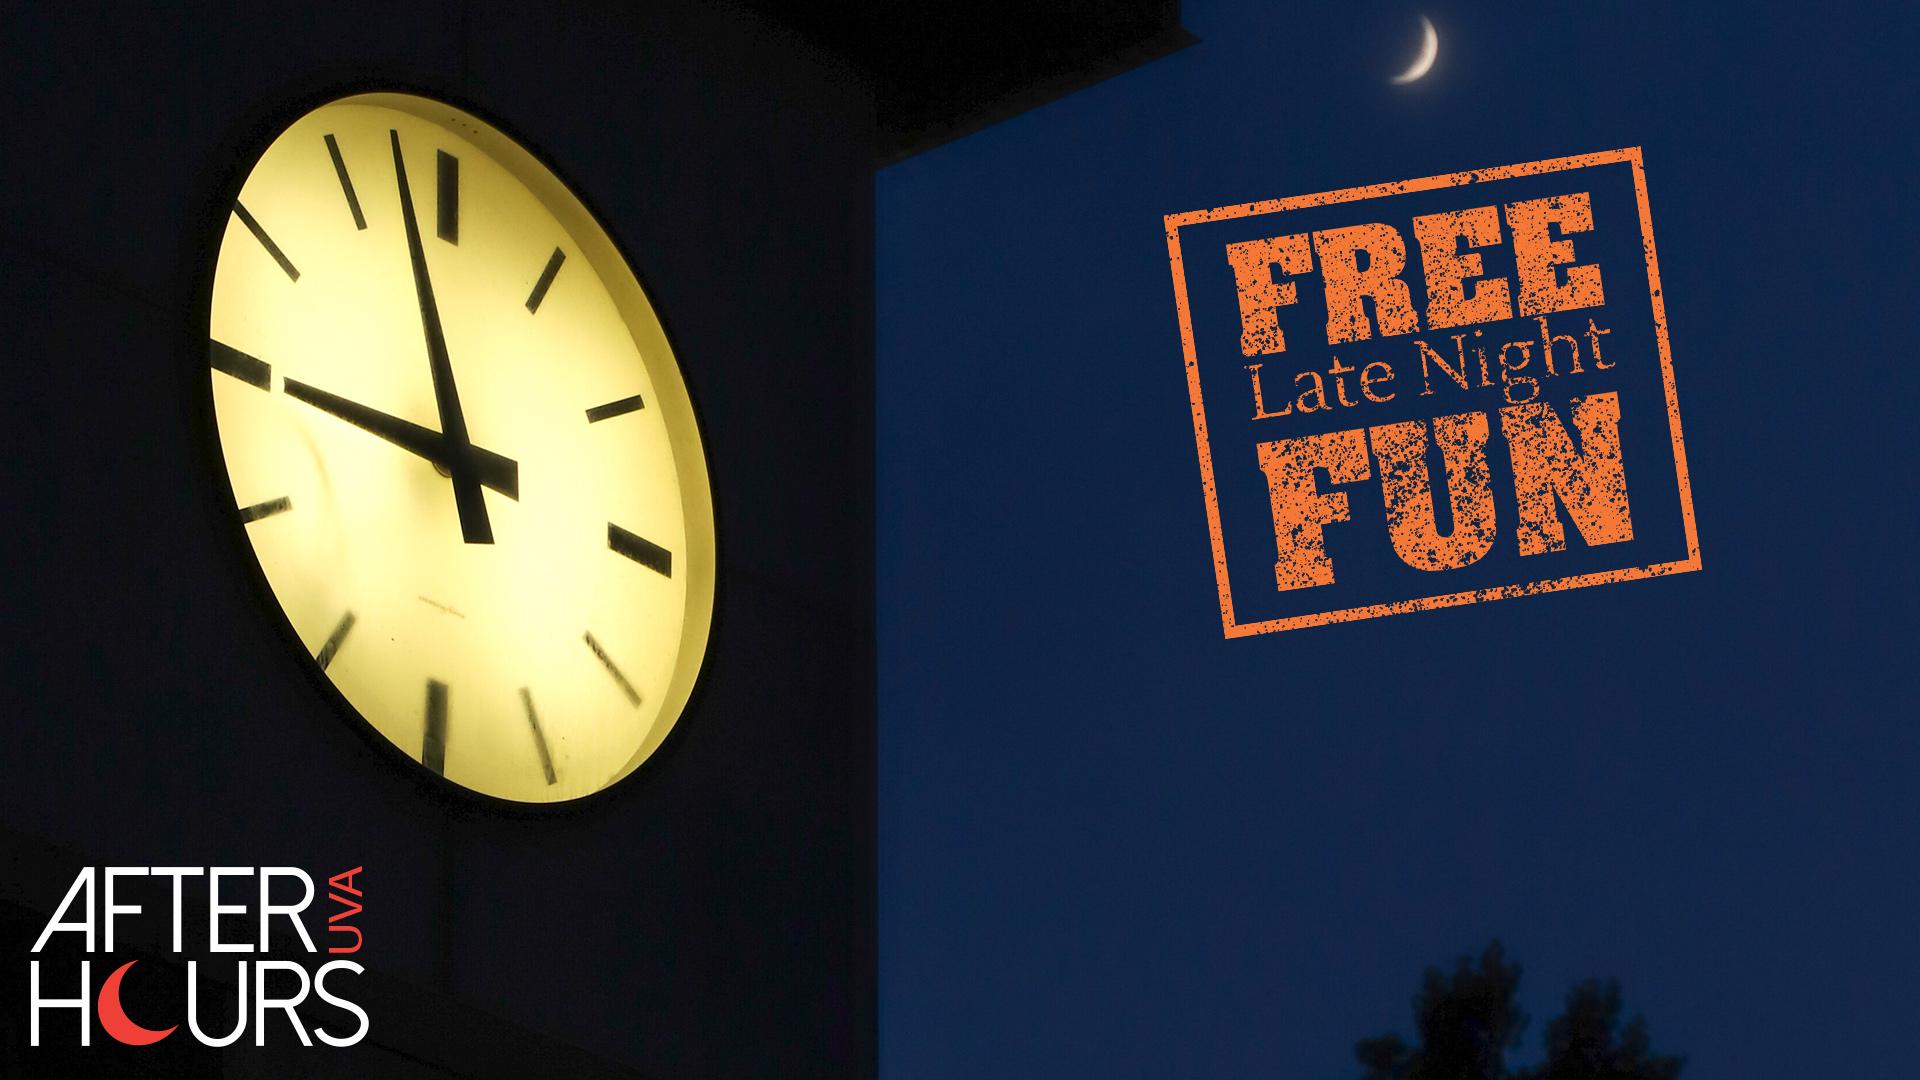 UVA After Hours FREE Late Night Fun for Students